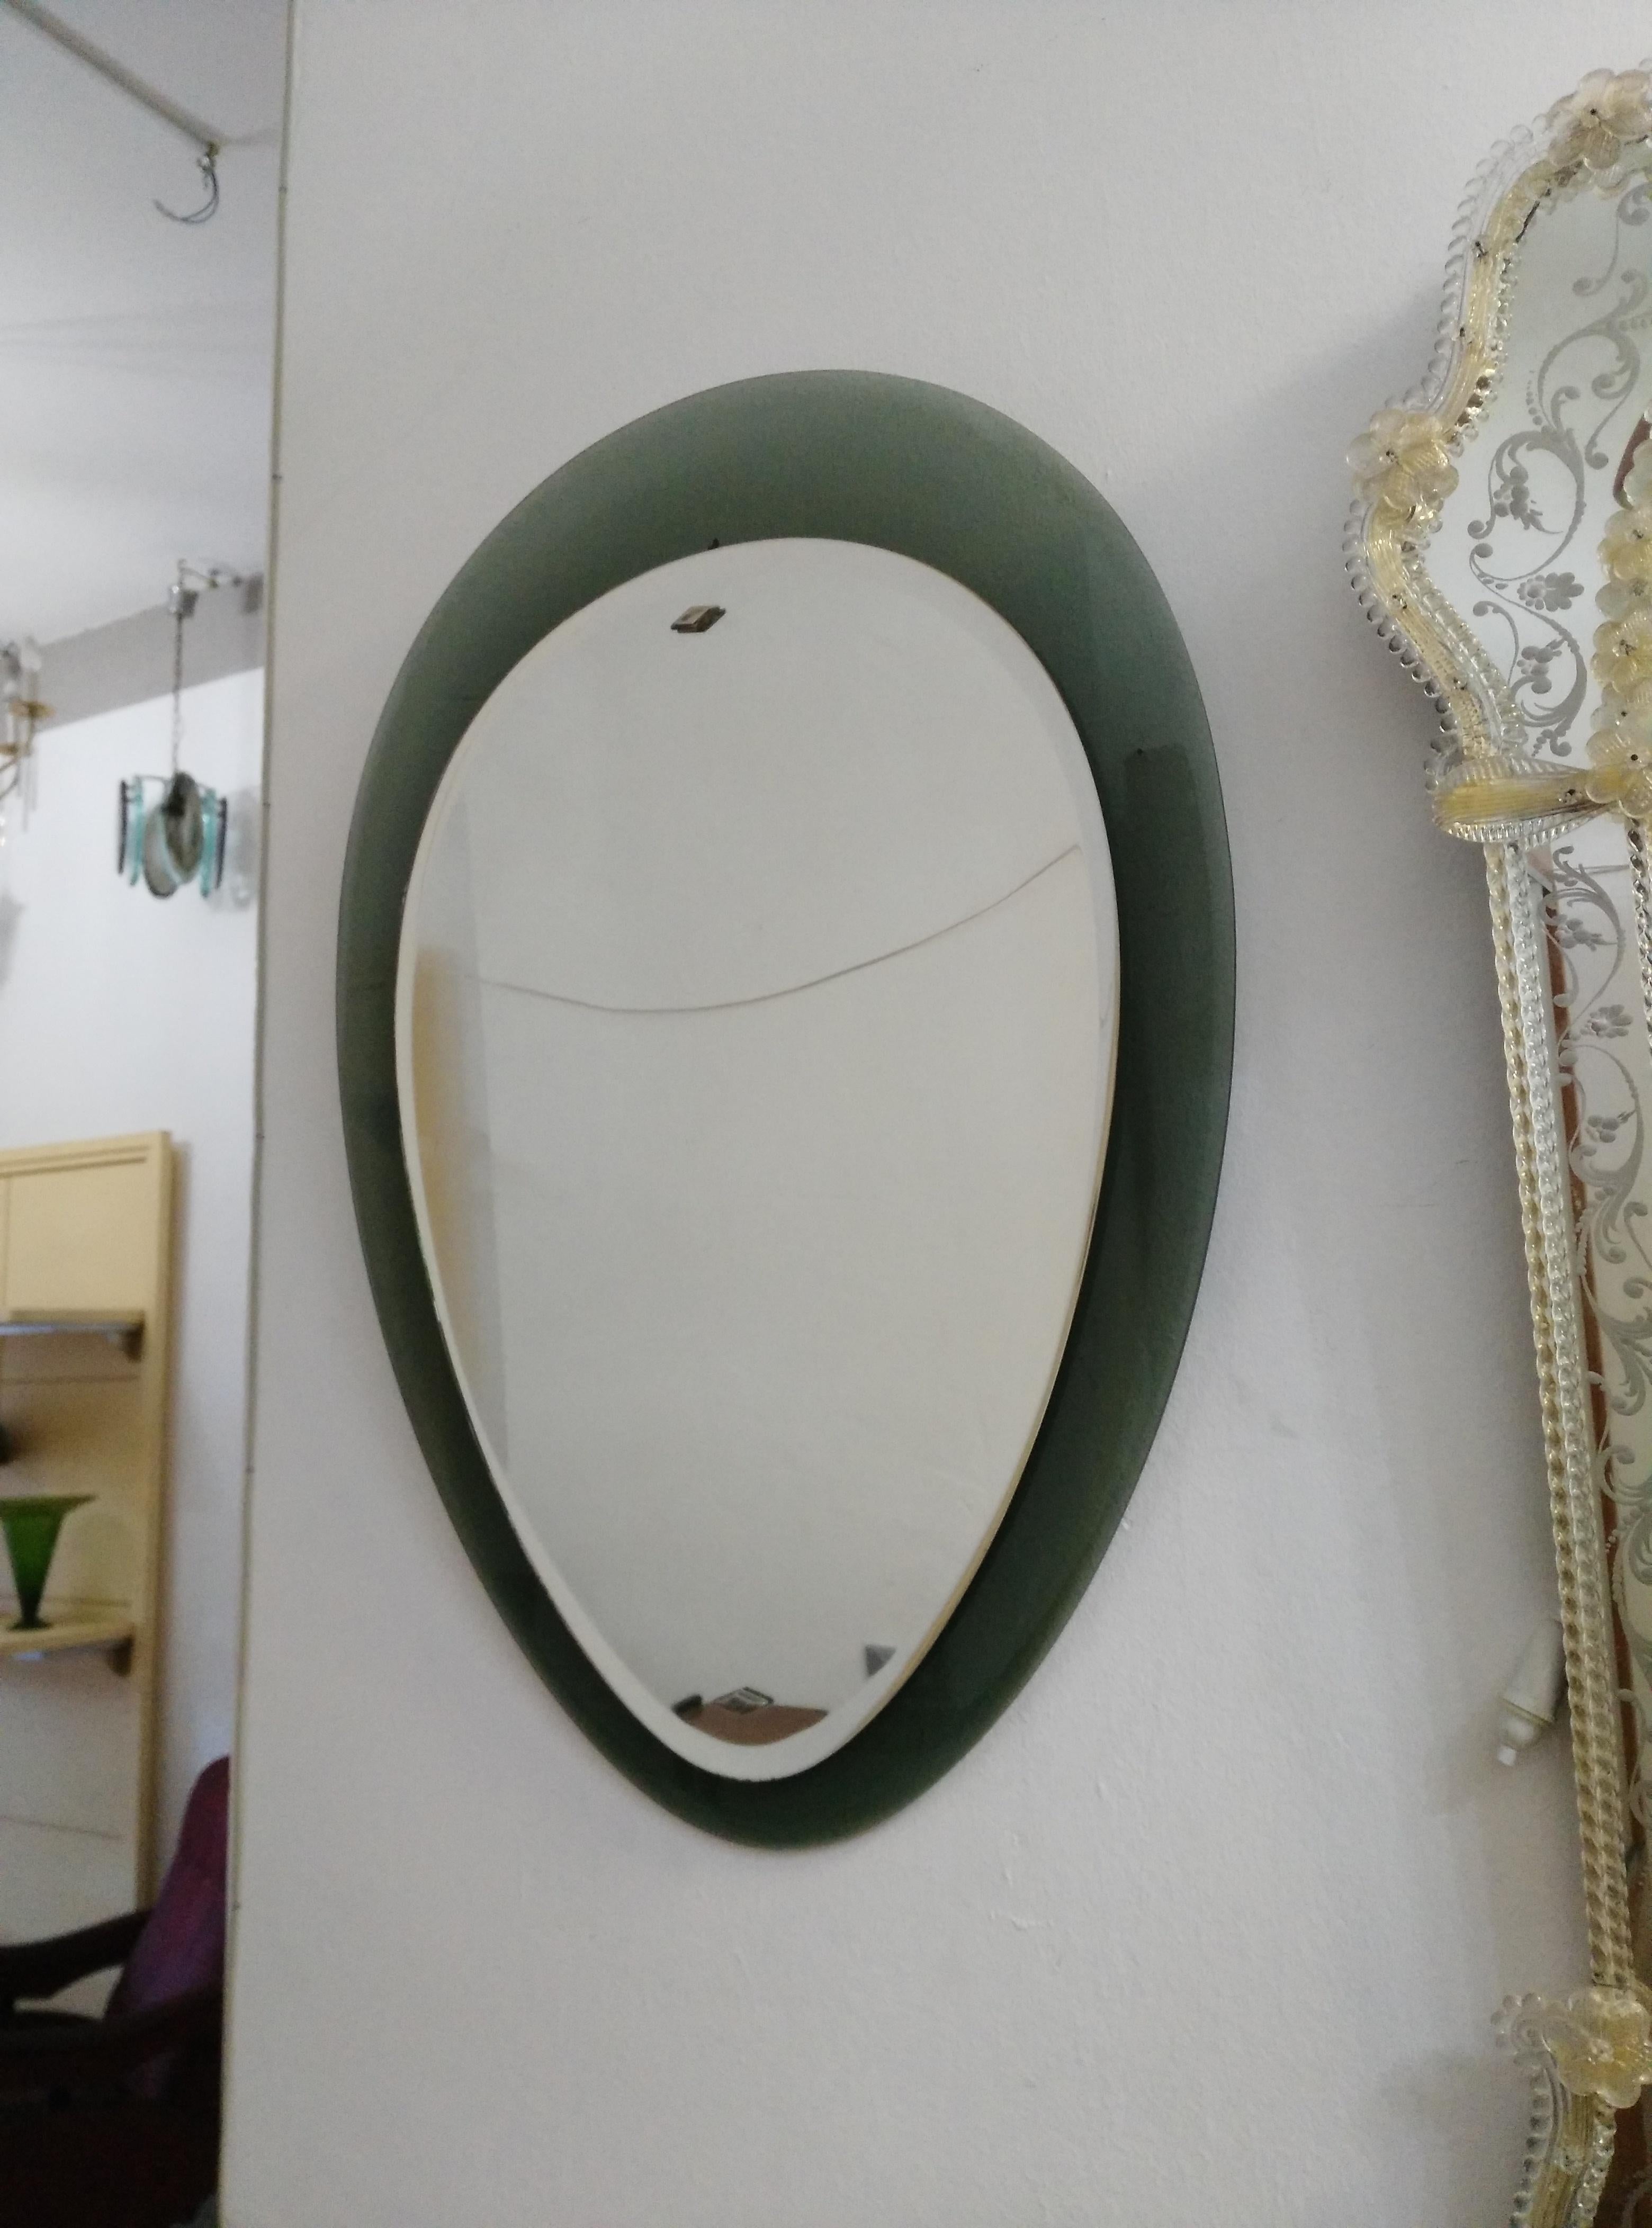 Wall mirror with a particular shape as it represents a drop, the part surrounding the mirror is in green colored glass.
Produced in Italy in the Mid-century